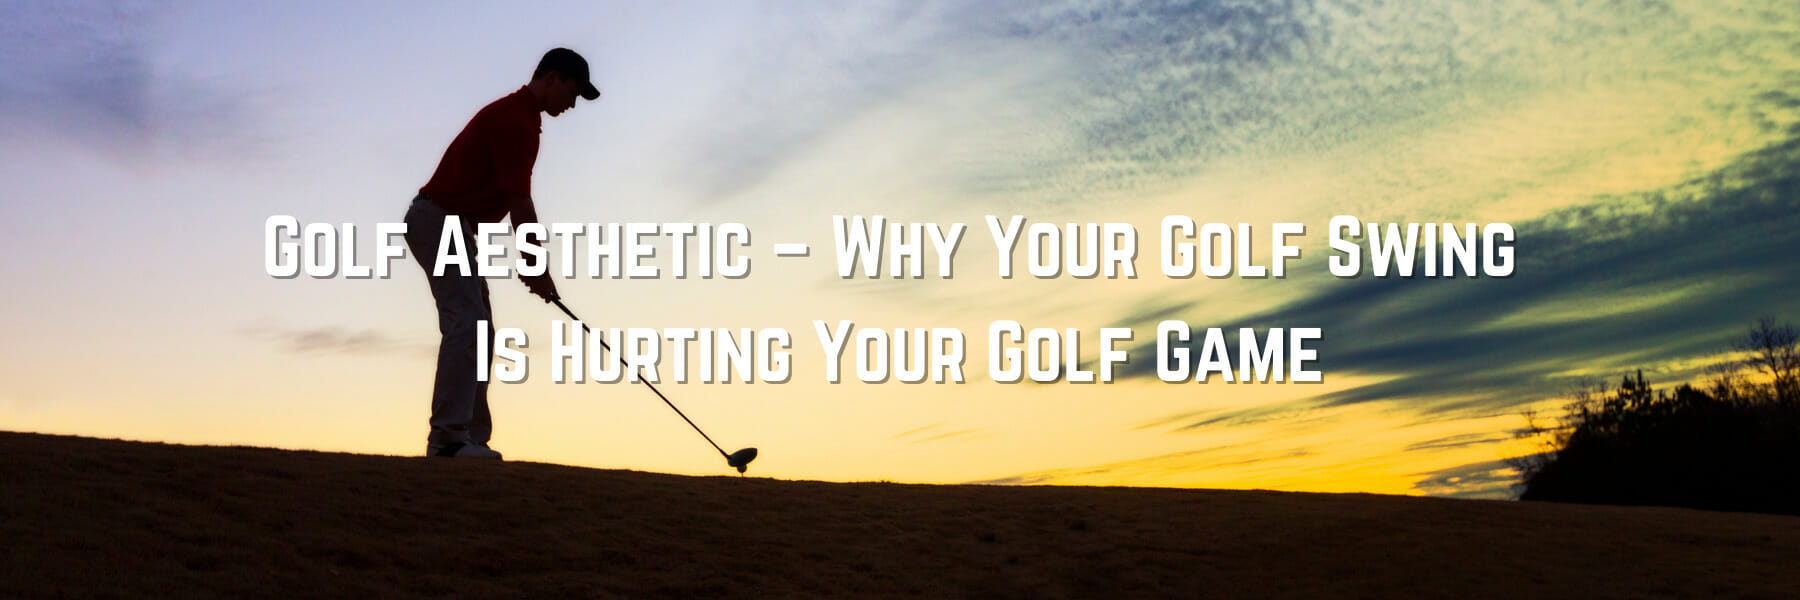 Golf Aesthetic - Why Your Golf Swing Is Hurting Your Golf Game